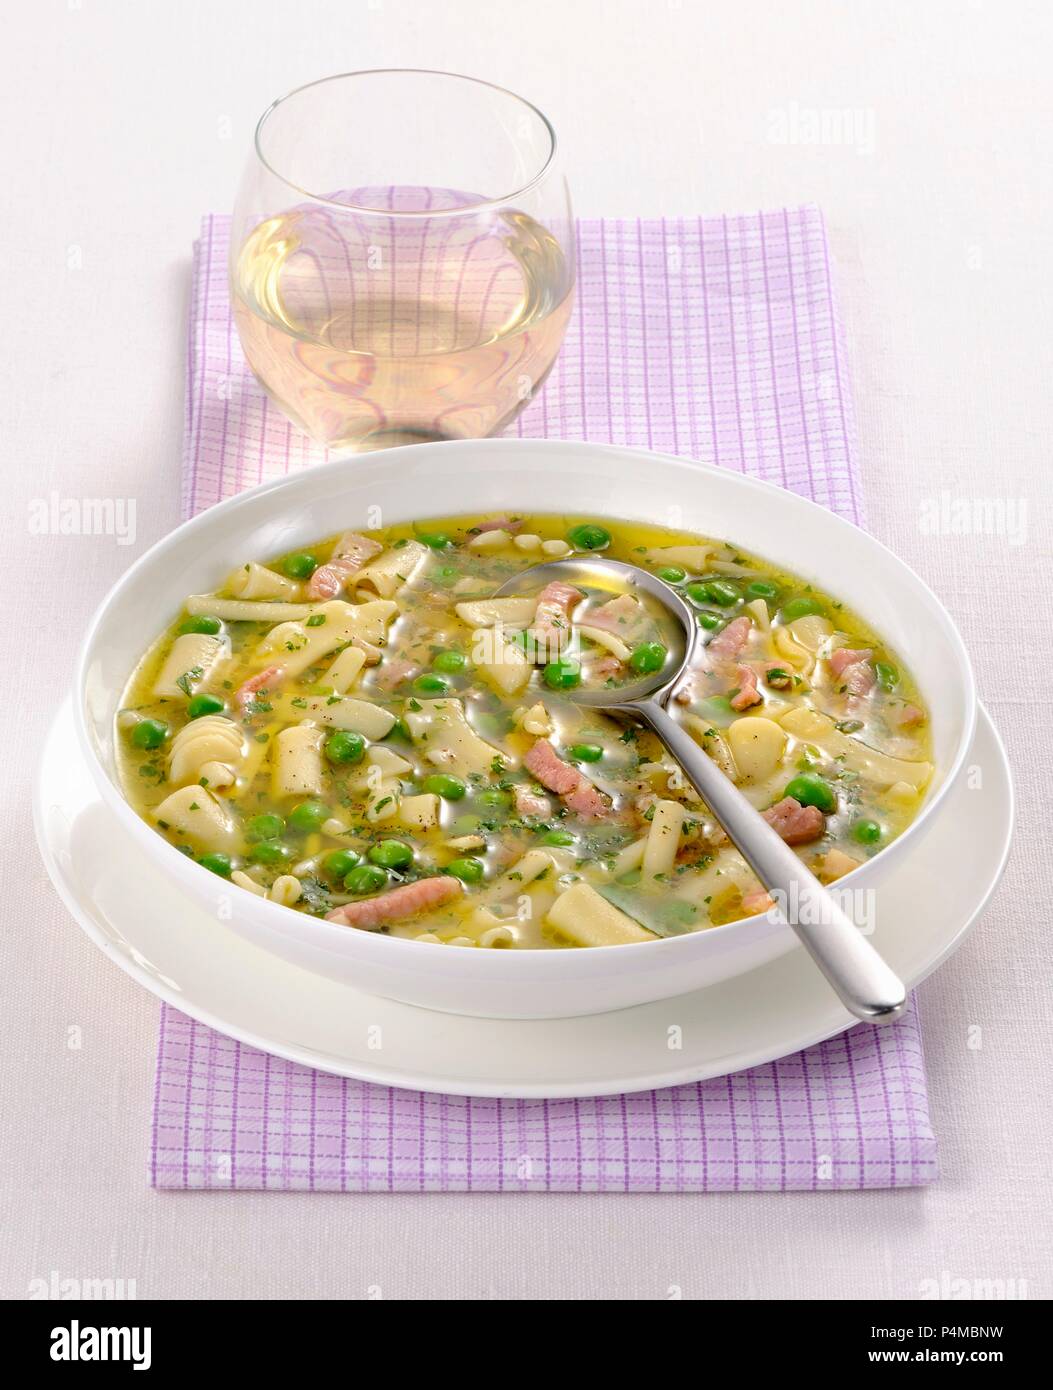 Noodle soup with peas and strips of ham Stock Photo